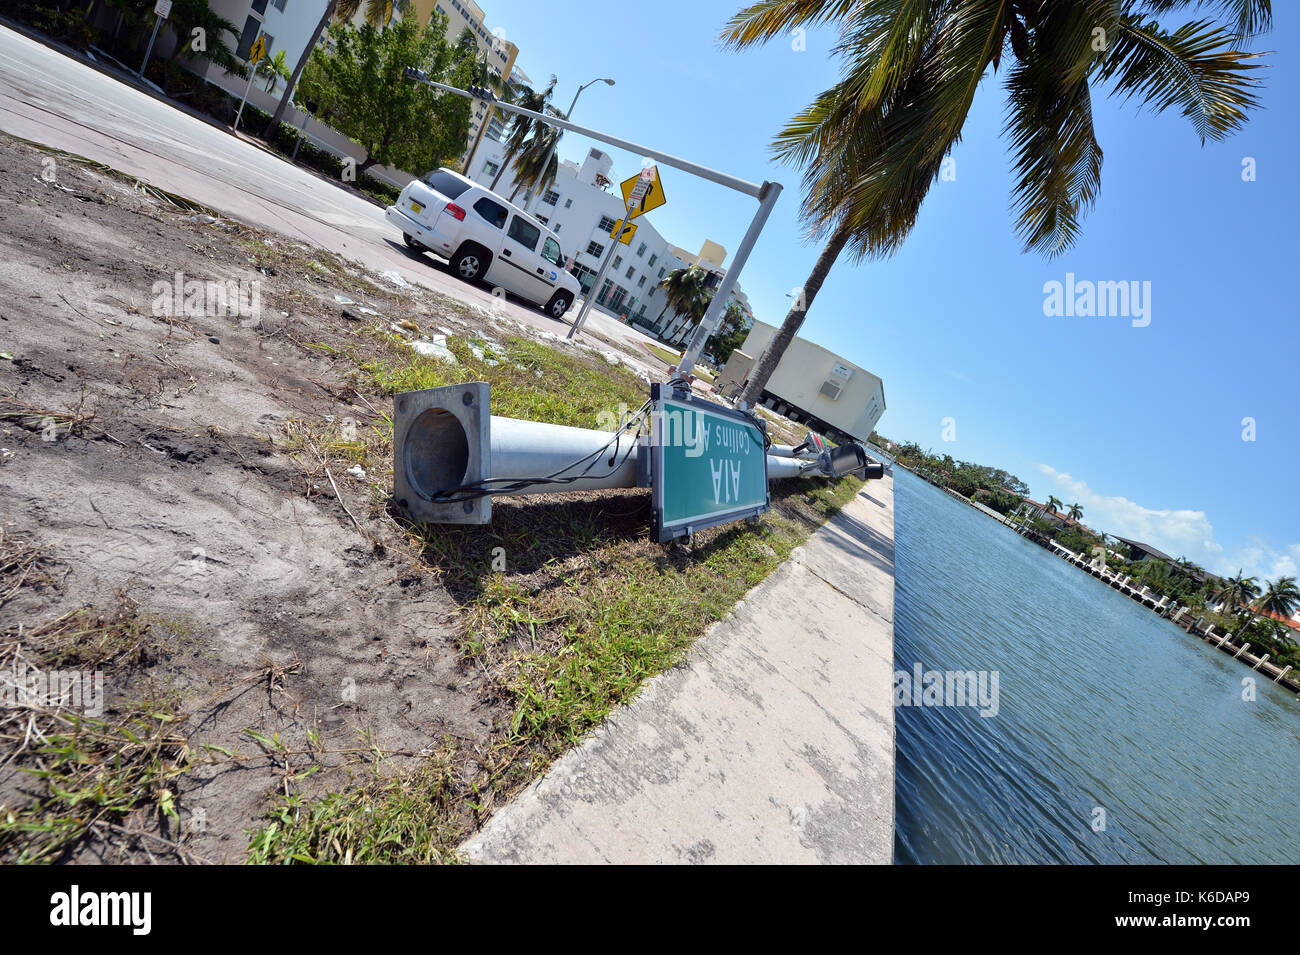 MIAMI BEACH, FL - SEPTEMBER 12: (EXCLUSIVE COVERAGE) ***NO NY DAILIES*** Residents waited hours to get over the causeway to return to South Beach after a mandatory evacuation only to find the Effects of Extreme Category 5 Hurricane Irma. The beach, Ocean Drive, Collins Ave, Miami Marina and even the Miami Port which are always packed with people, boats and cruise ships were all empty and had almost an erie dead calm to it as millatary black hawk helicopters patrolled the beaches as residents returned to their home's and business on September 12, 2017 in Miami Beach, Florida People: Collin Stock Photo